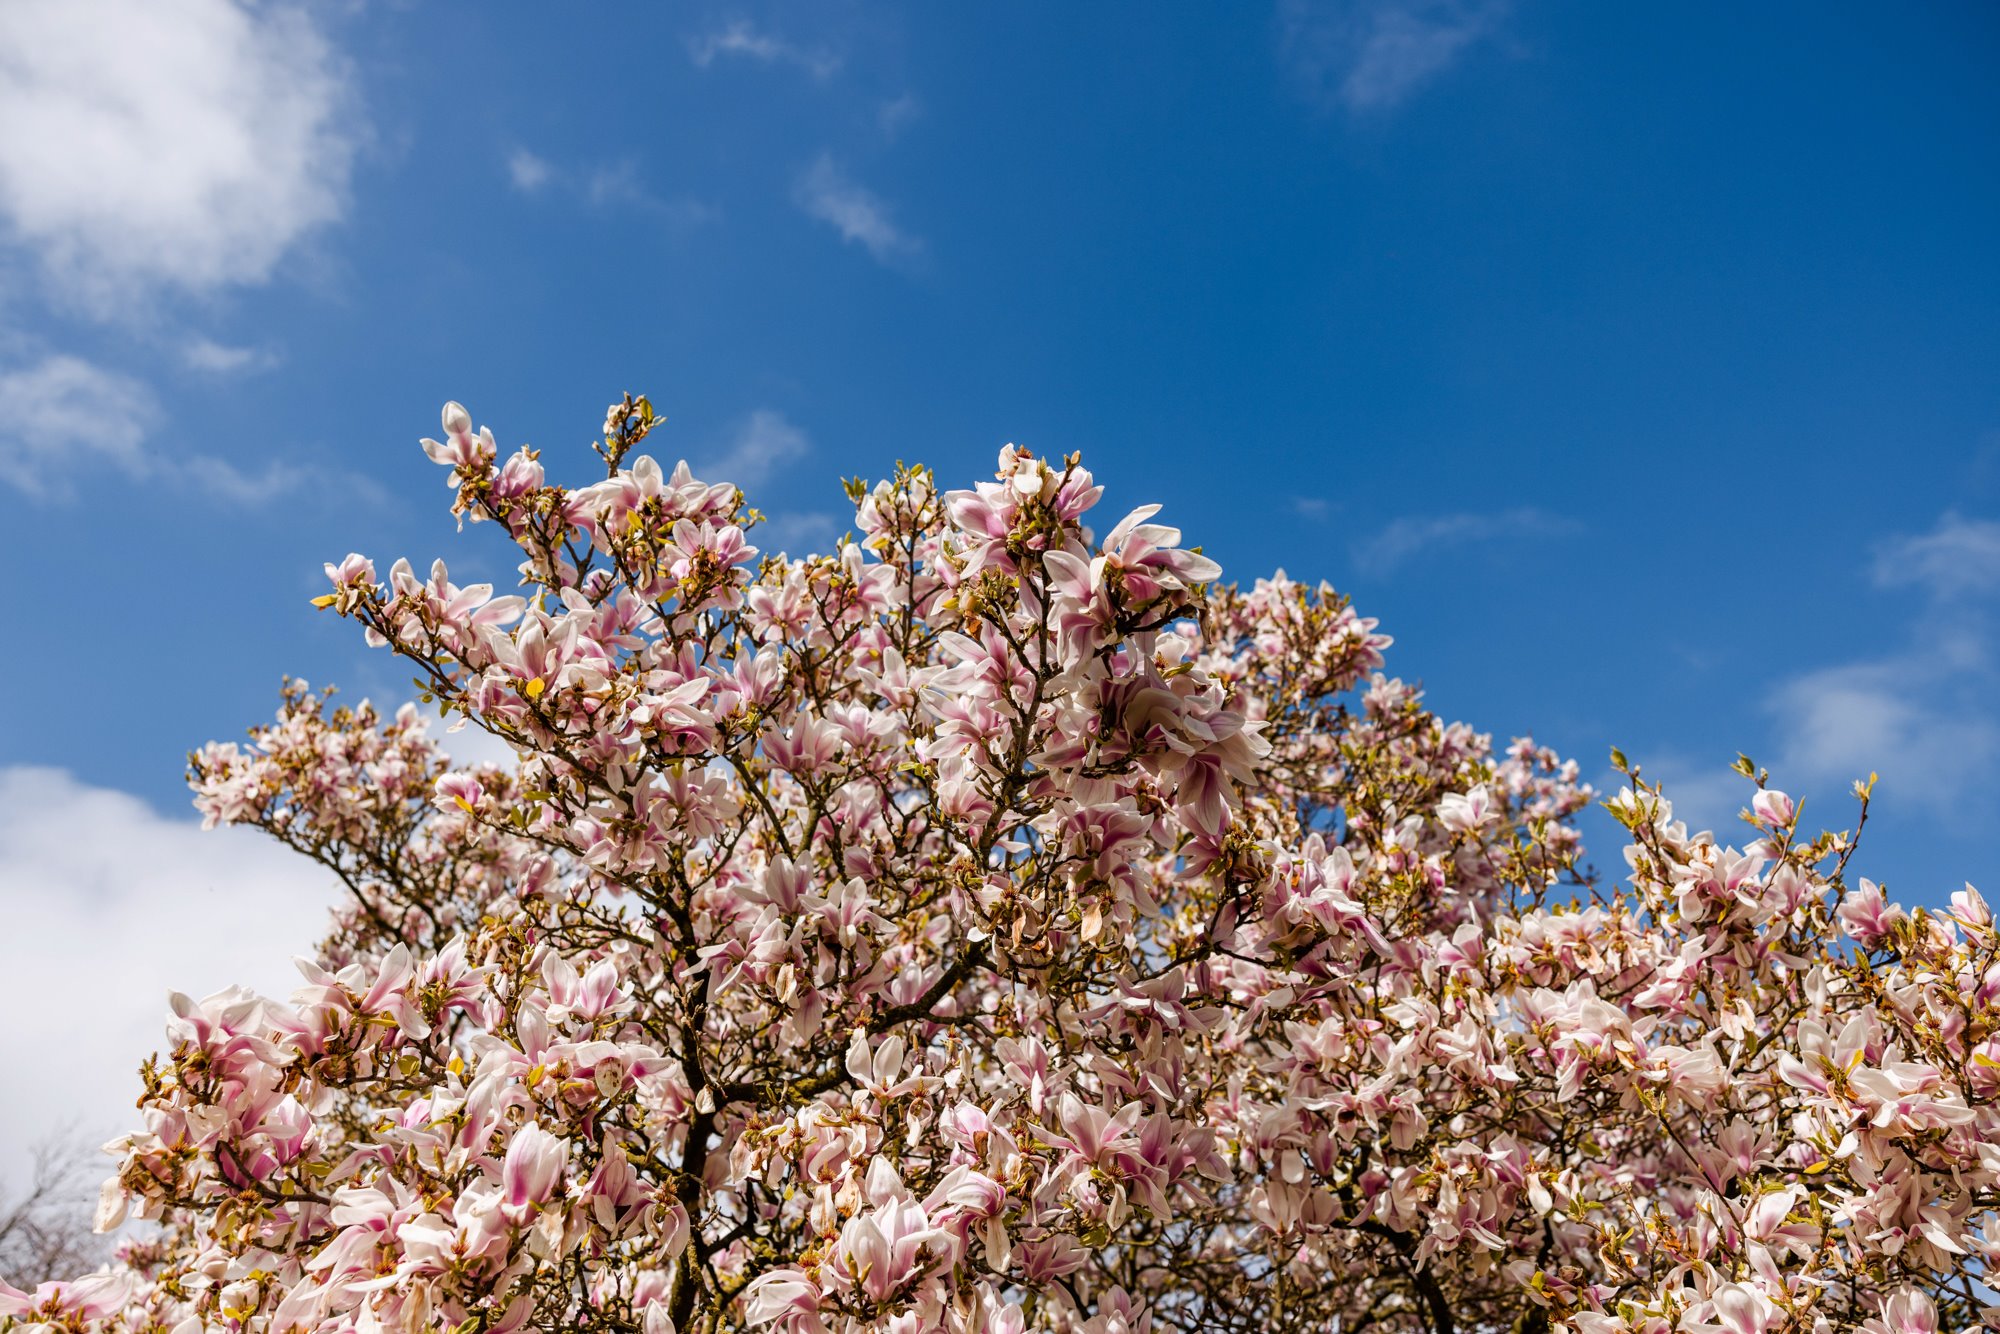 magnolia against blue skies in walled garden wedding venue elmore court in the cotswolds